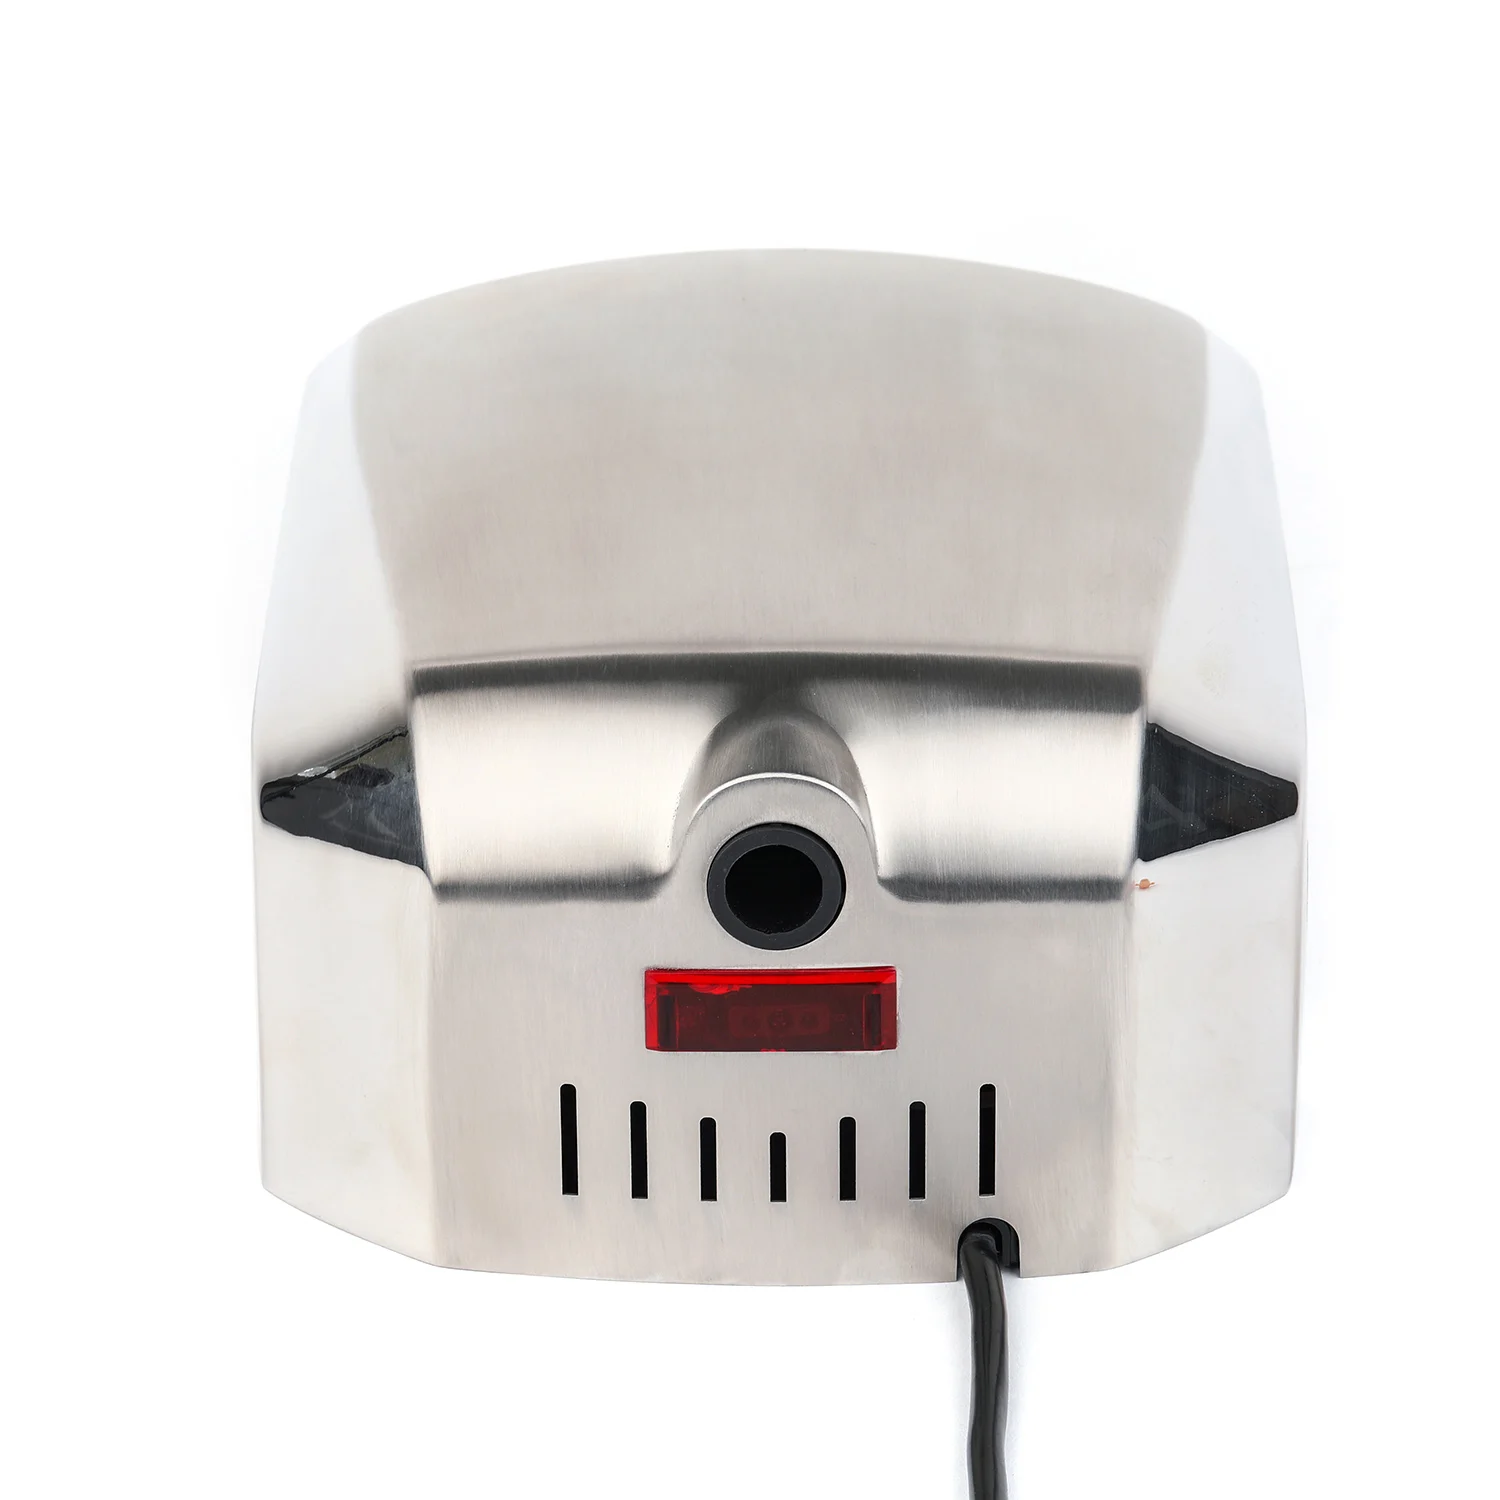 
Automatic Hand Dryer for Toilet Stainless Steel High Speed Jet Air Hand Dryer with HEPA Filter 